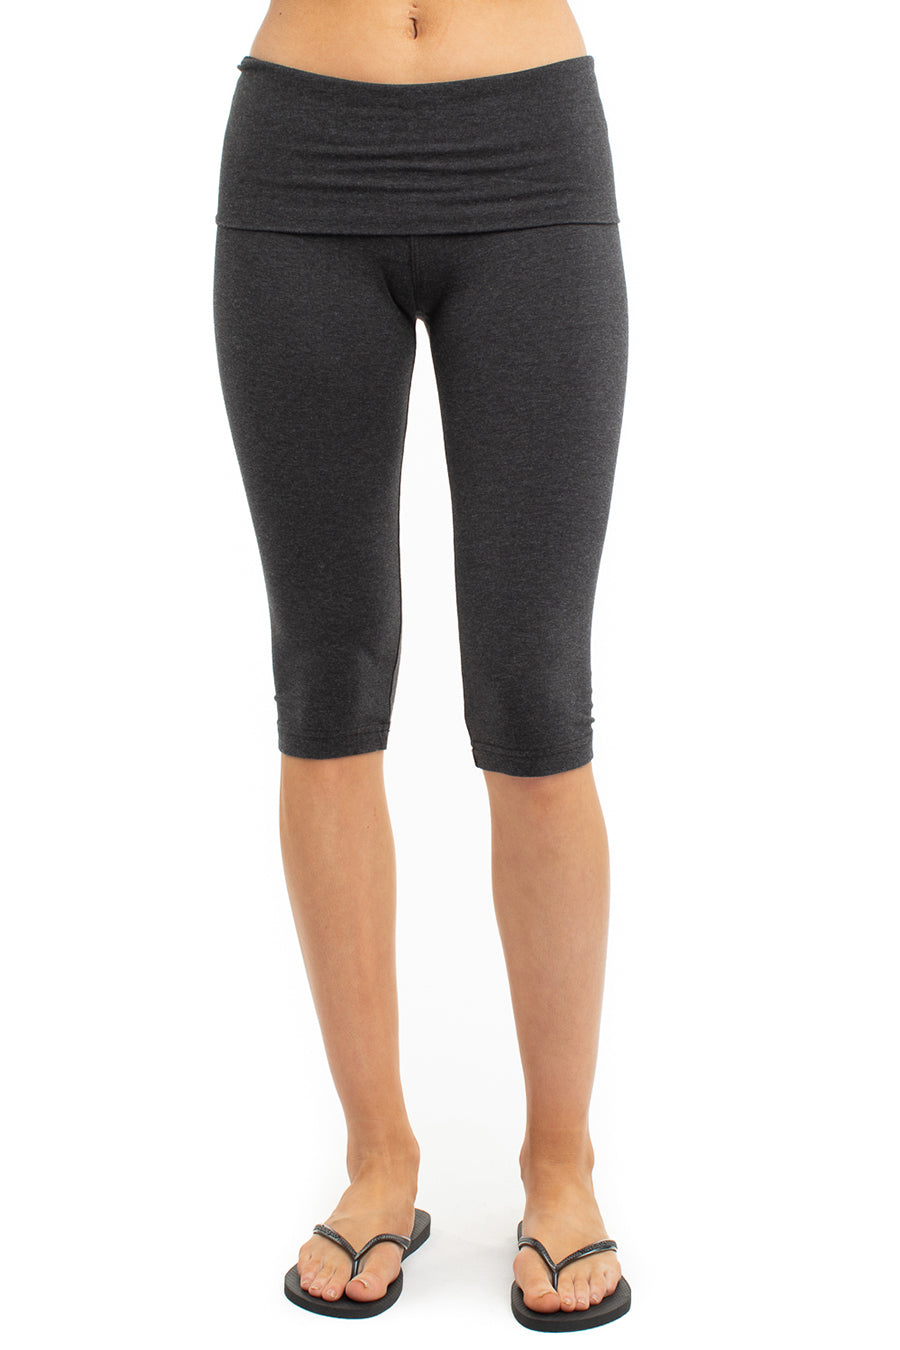 Hard Tail Forever Low Rise Knee Legging - Dark Charcoal Heather